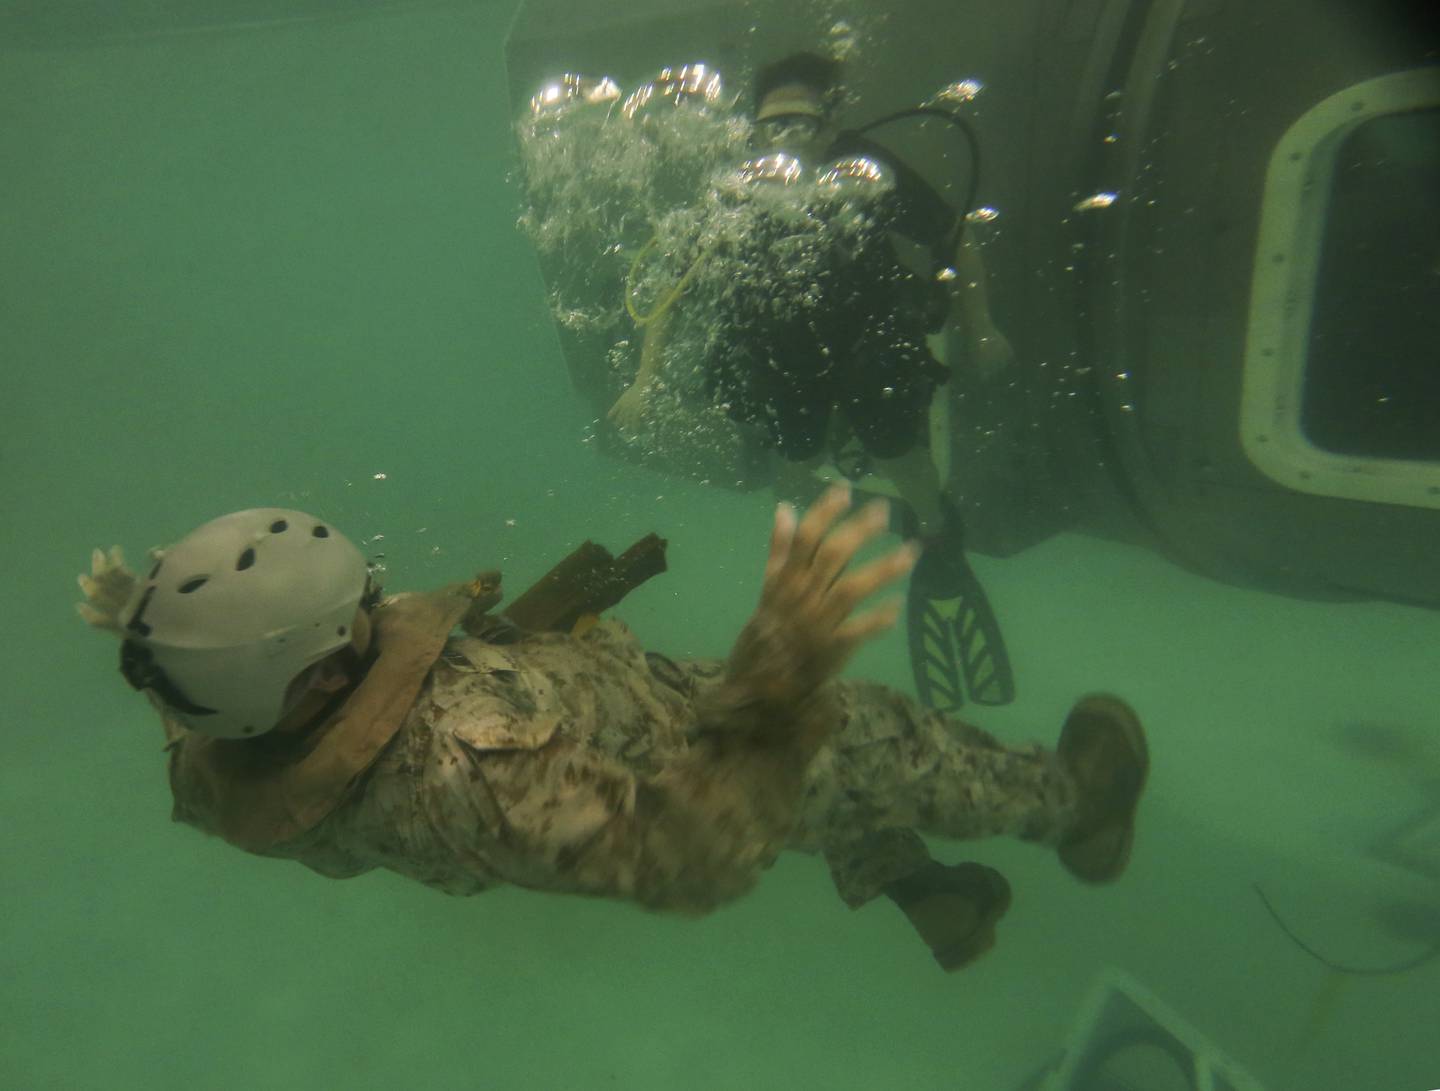 A Marine with the 26th Marine Expeditionary Unit conducts evacuation procedures out of a Modular Amphibious Egress Trainer during underwater egress training at the water survival training center aboard Marine Corps Base Camp Lejeune, N.C., March 24, 2015.